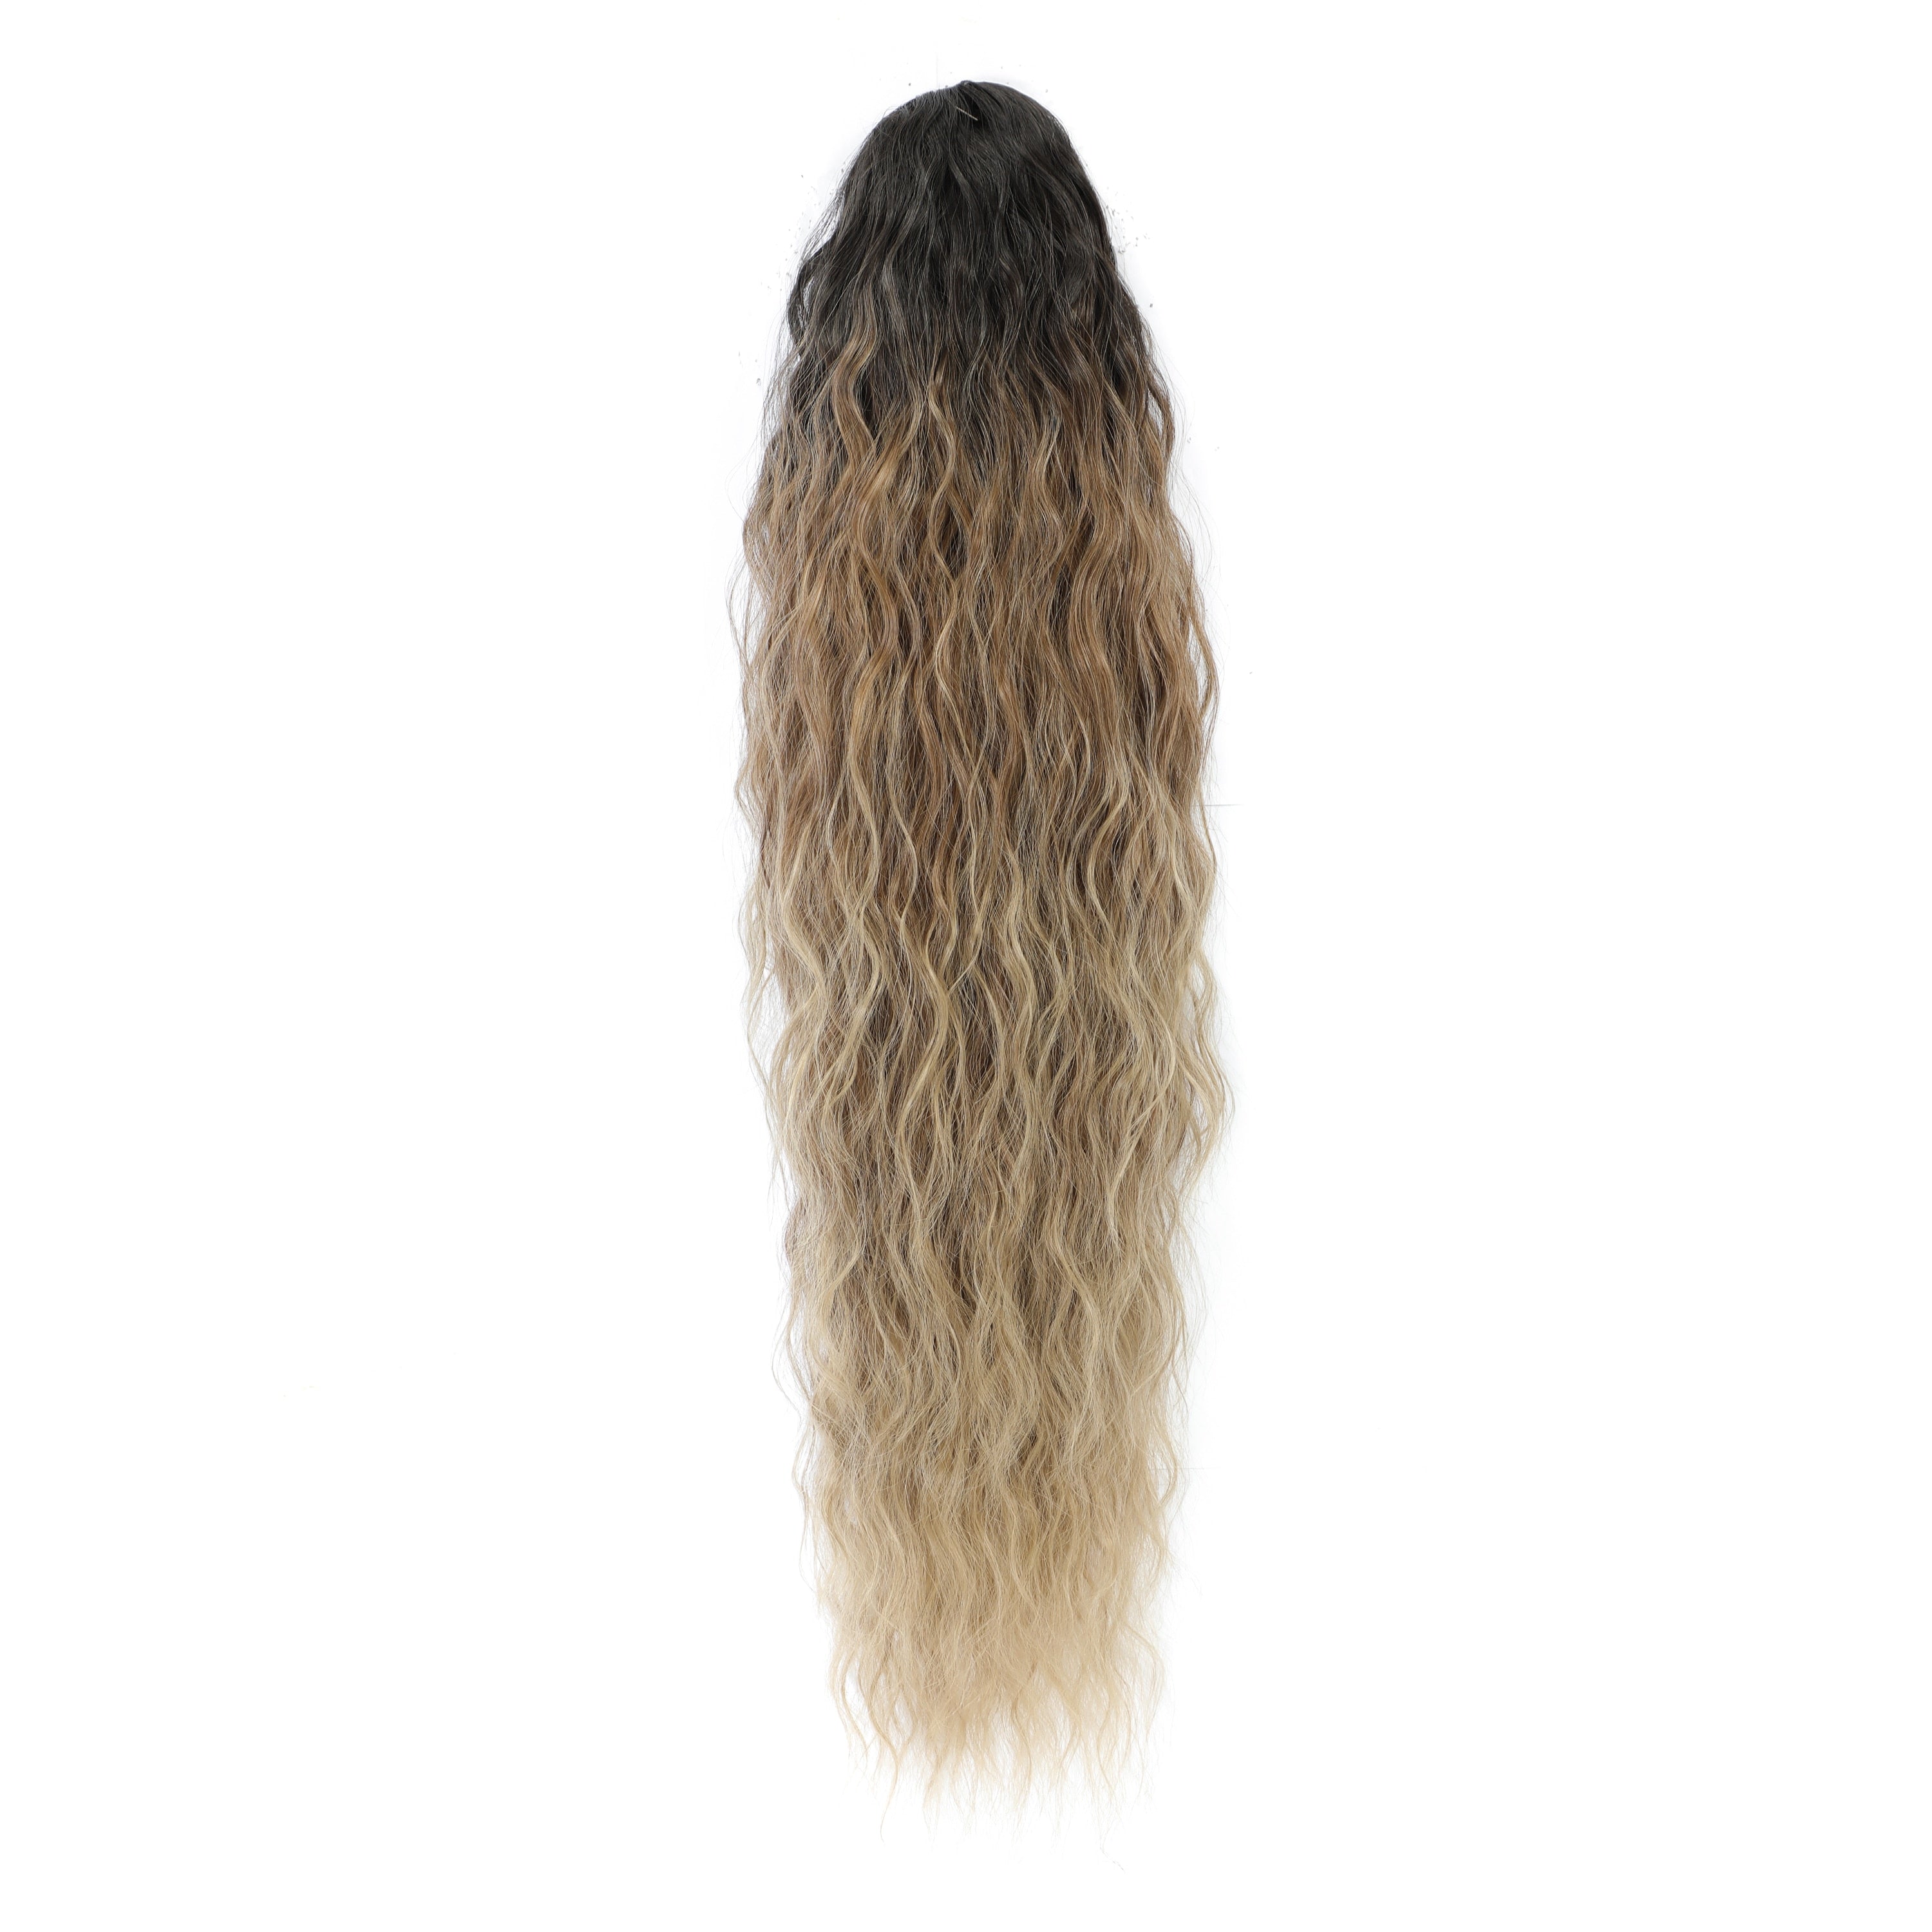 Water Wave Ponytail Hair Extension